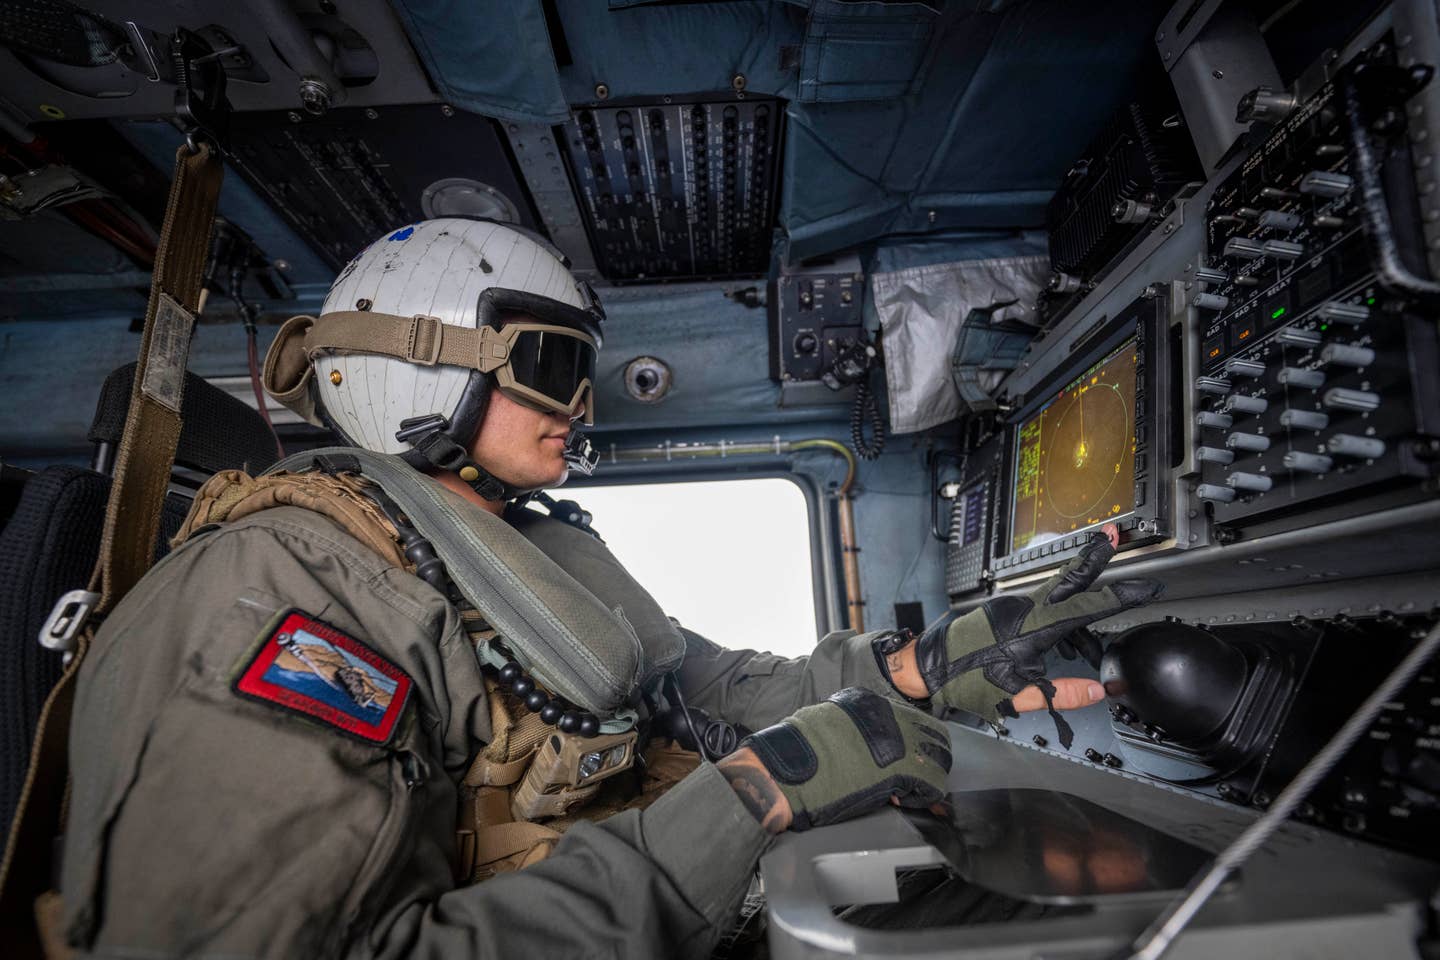 PACIFIC OCEAN (July 30, 2022) Naval Aircrewman (Helicopter) 1st Class Humberto Alba, attached to Helicopter Maritime Strike Squadron (HSM) 37, checks a radar during flight operations during Rim of the Pacific (RIMPAC) 2022. (U.S. Coast Guard photo by Petty Officer 3rd Class Taylor Bacon)